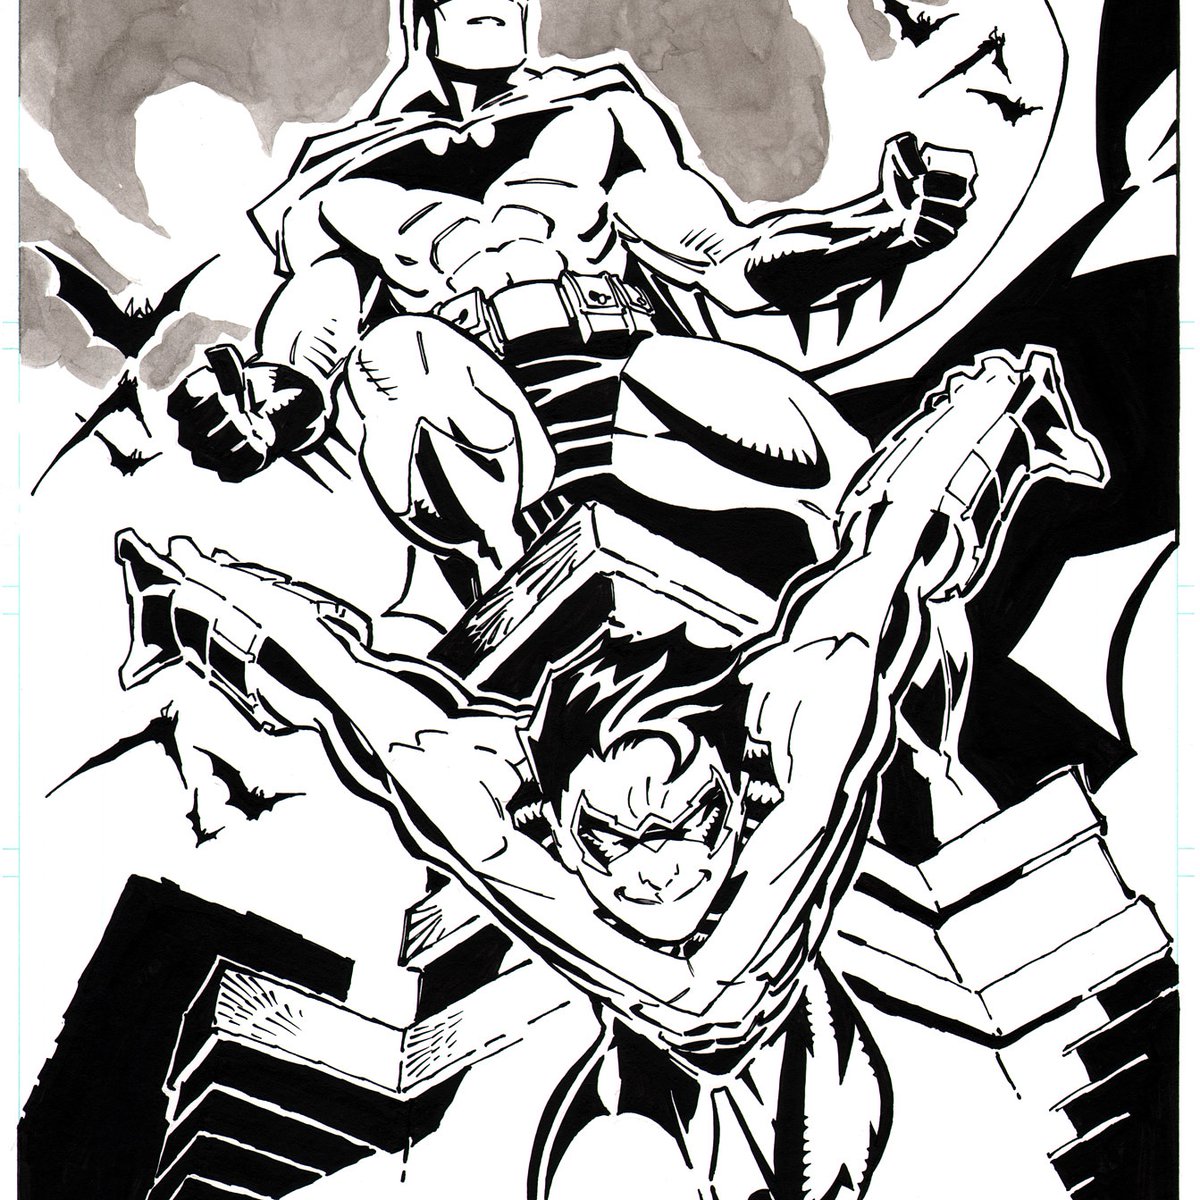 My commissions list is OPEN! Check out info at scottmcdaniel.net/comm-mob.html and drop me a line at mcdaniel.scott@comcast.net Looking forward to creating something cool with you!